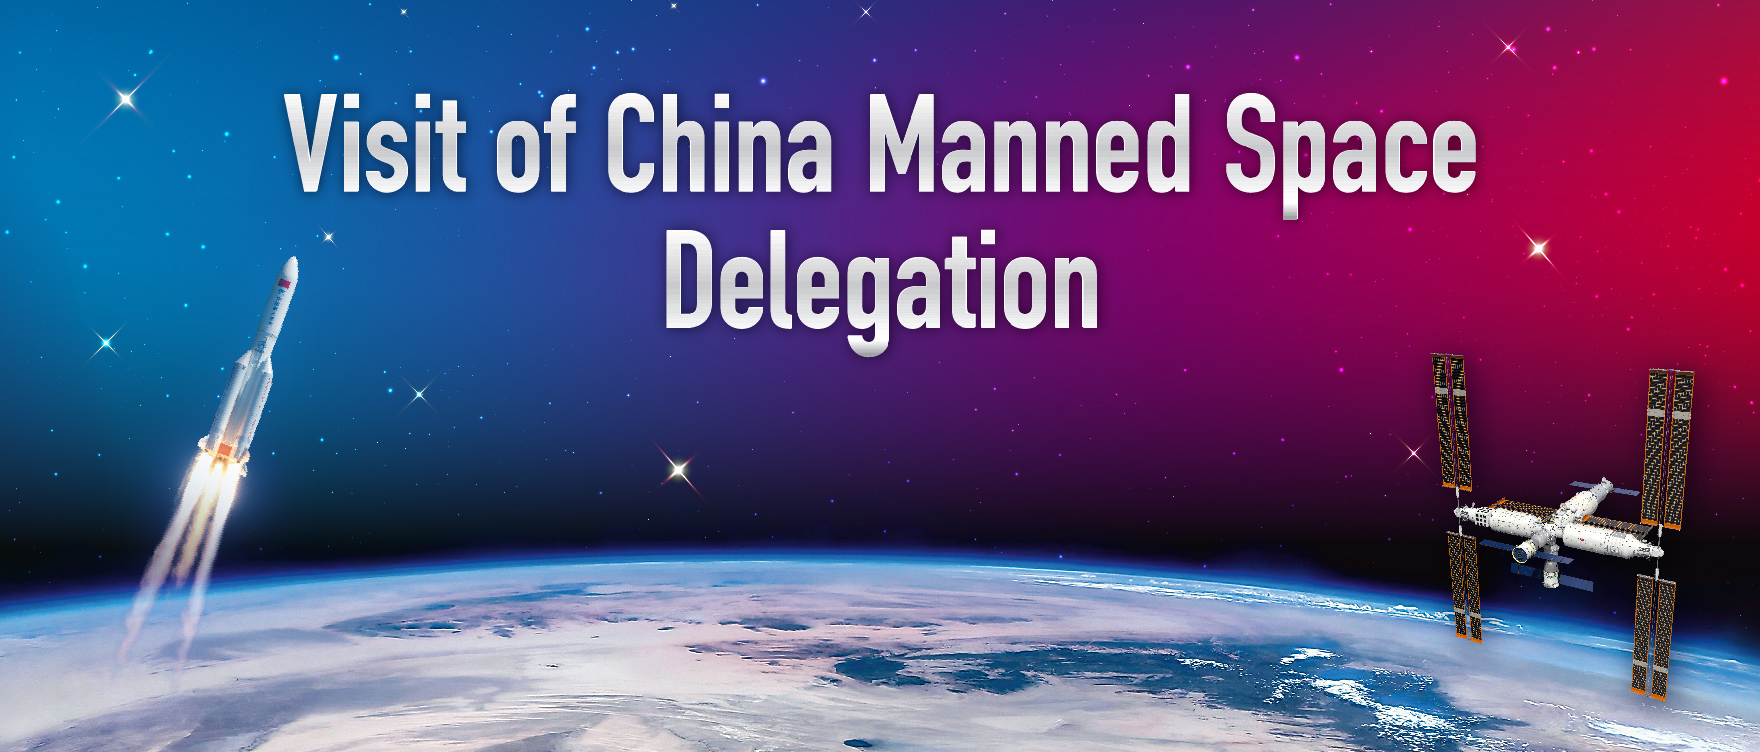 Homepage of Visit of China Manned Space Delegation